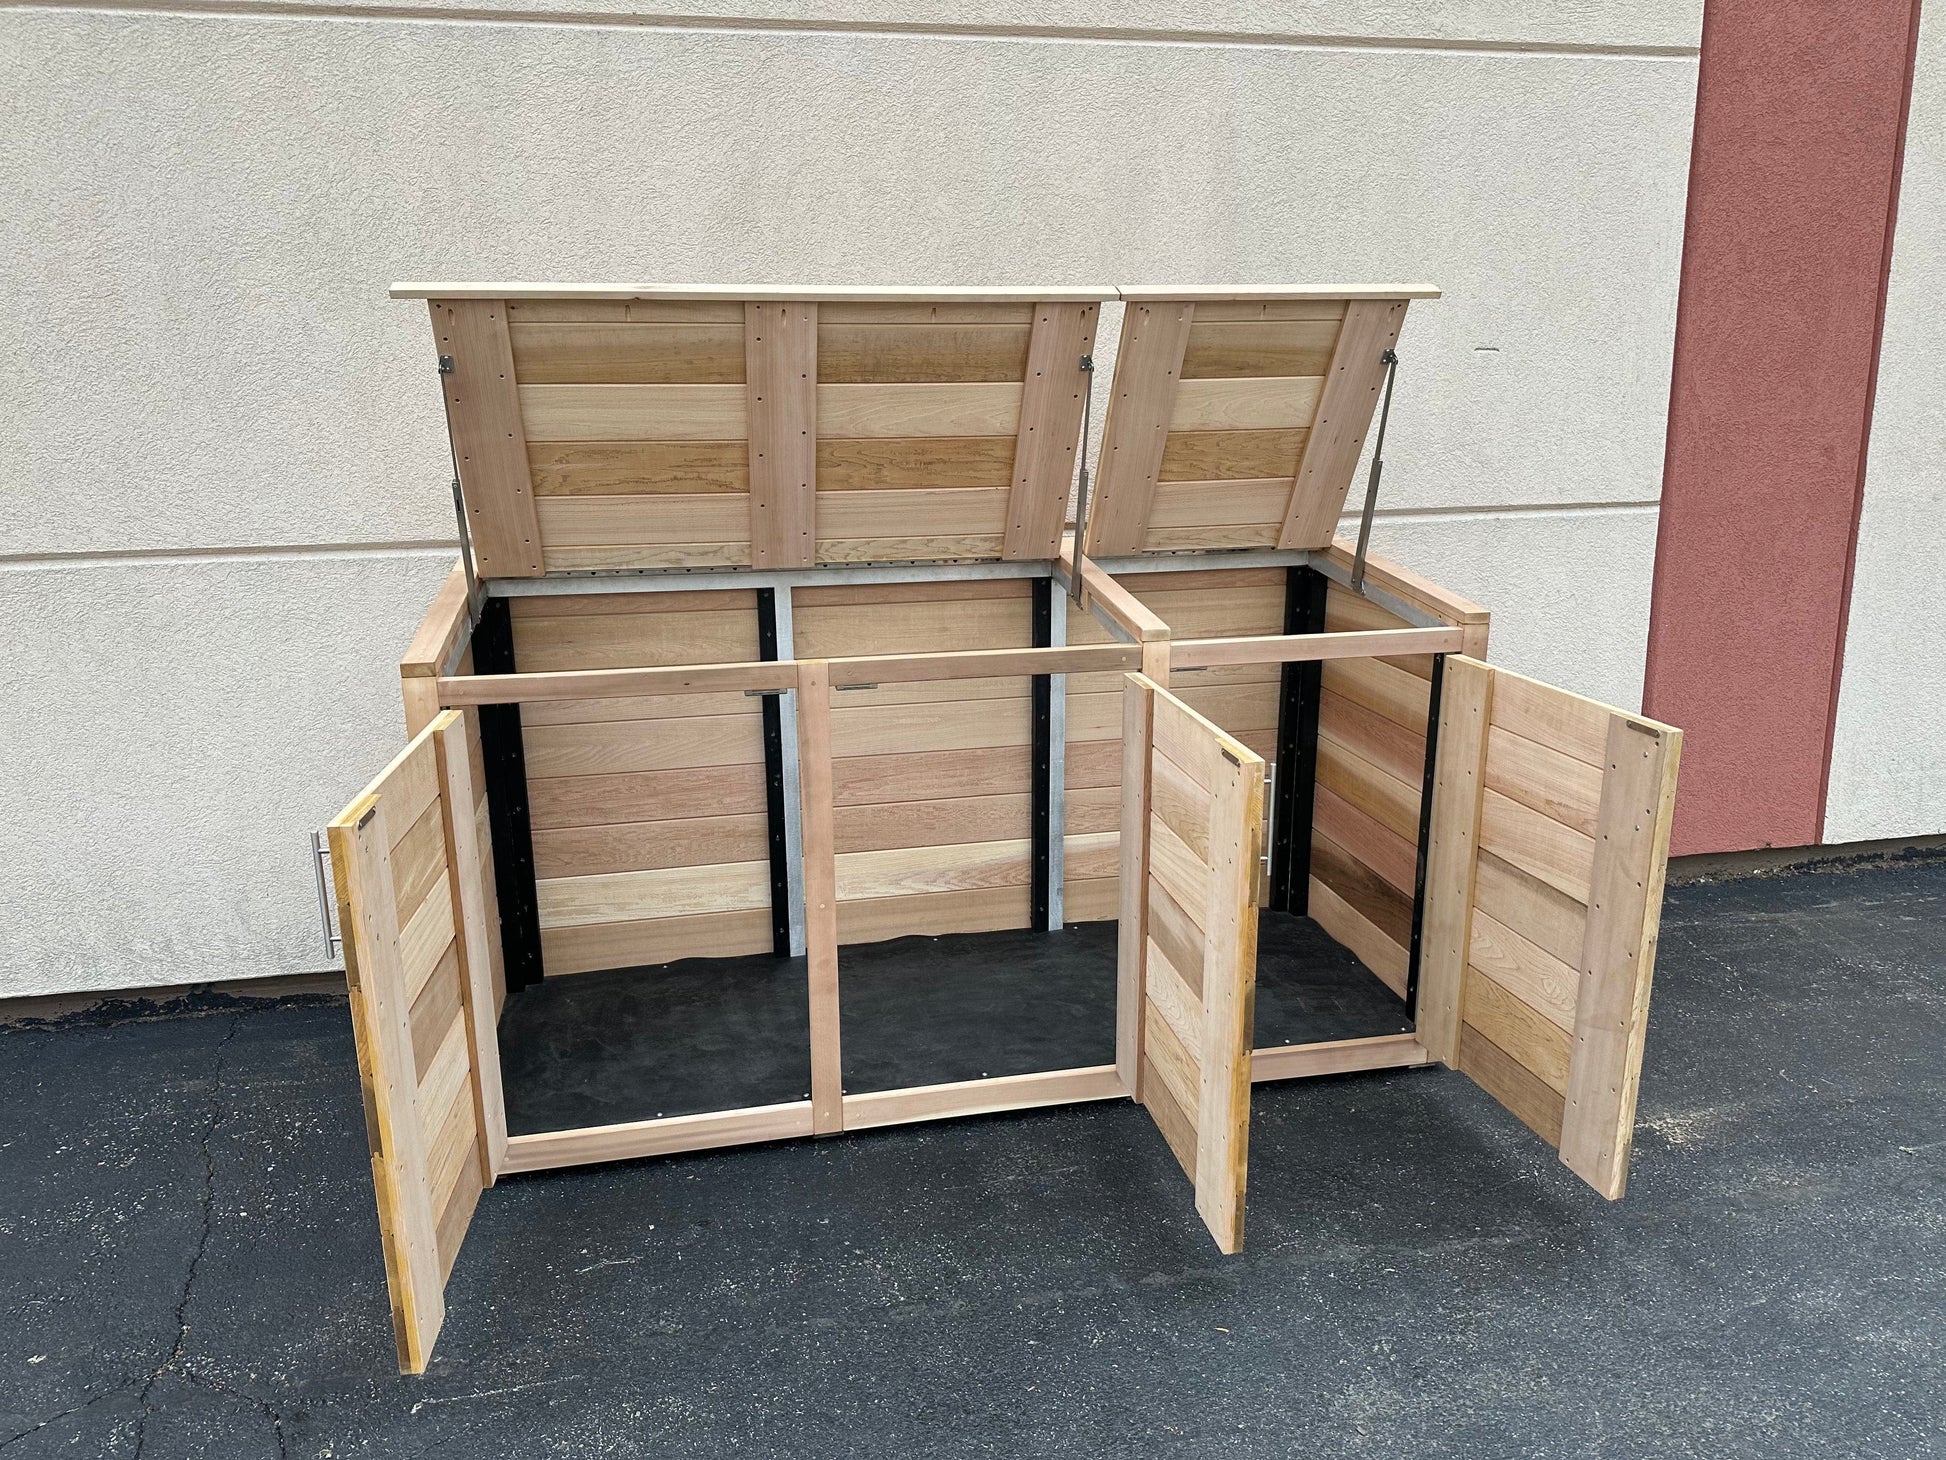 How to Build a Simple Modern Trash Can Screen